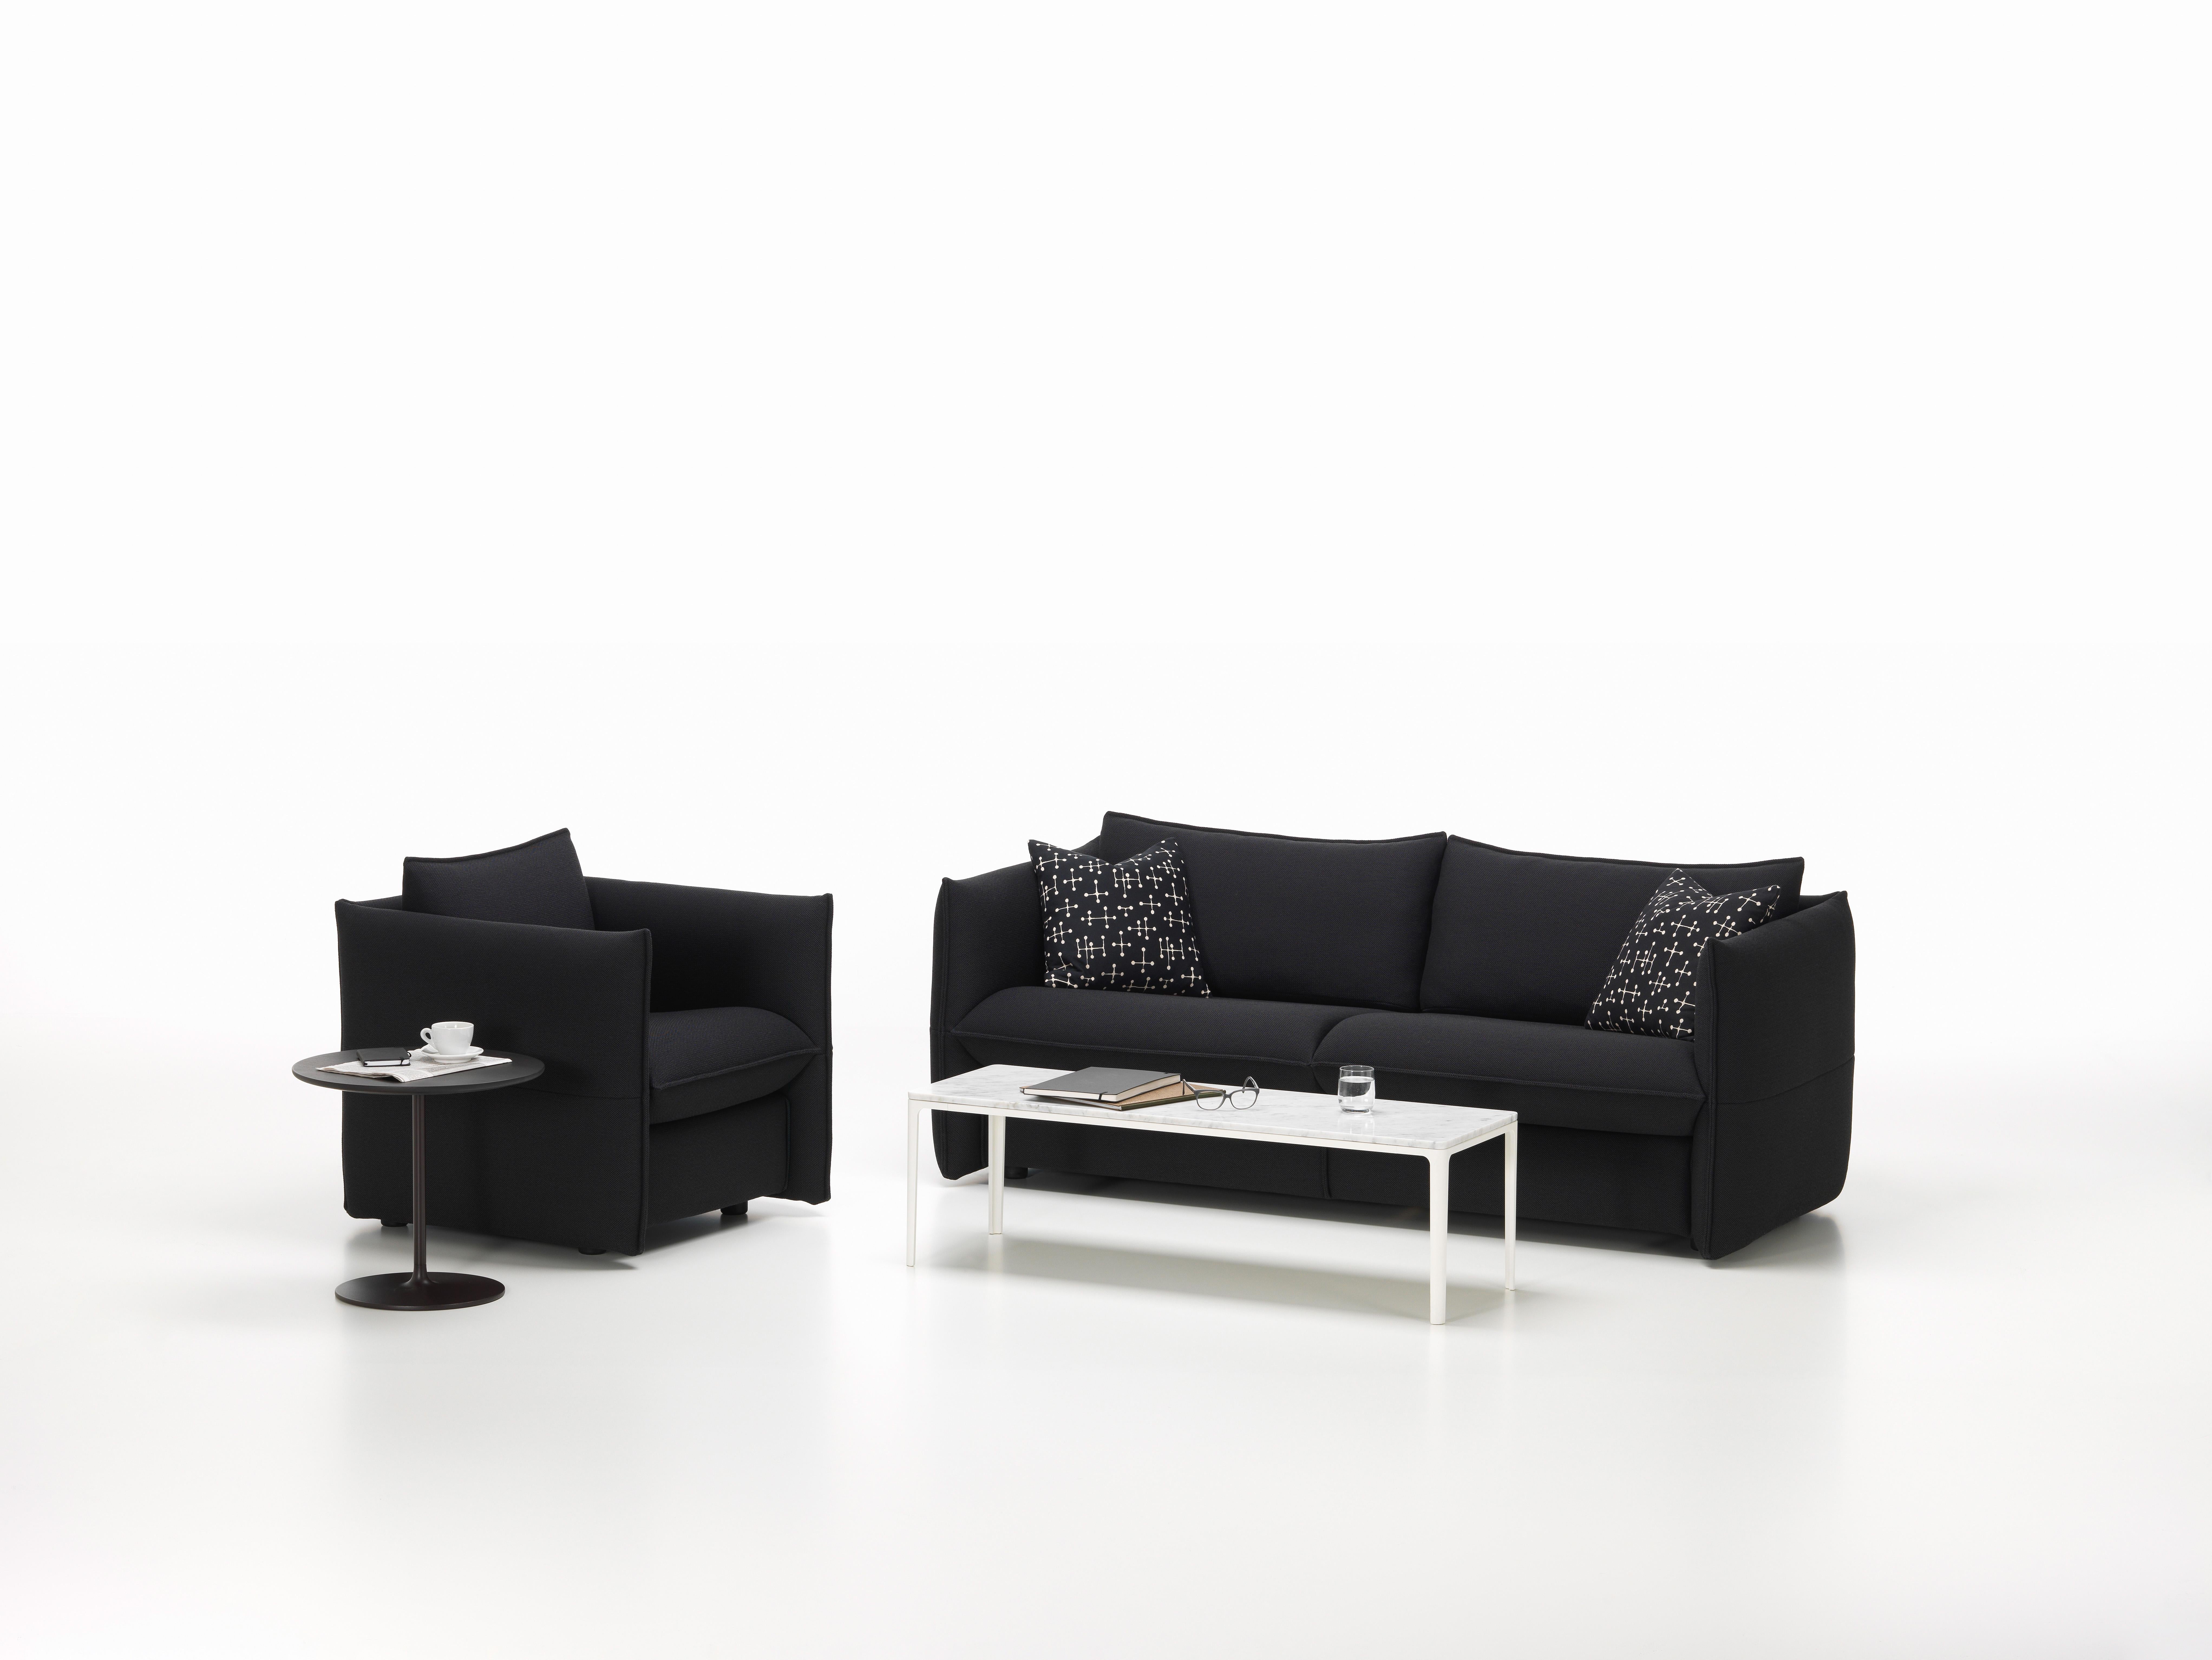 These items are currently only available in the United States.

The Mariposa Club armchair is suitable for smaller urban living spaces and for lounge and hospitality settings. The slim line body of both the sofa and armchairs offers maximum seating